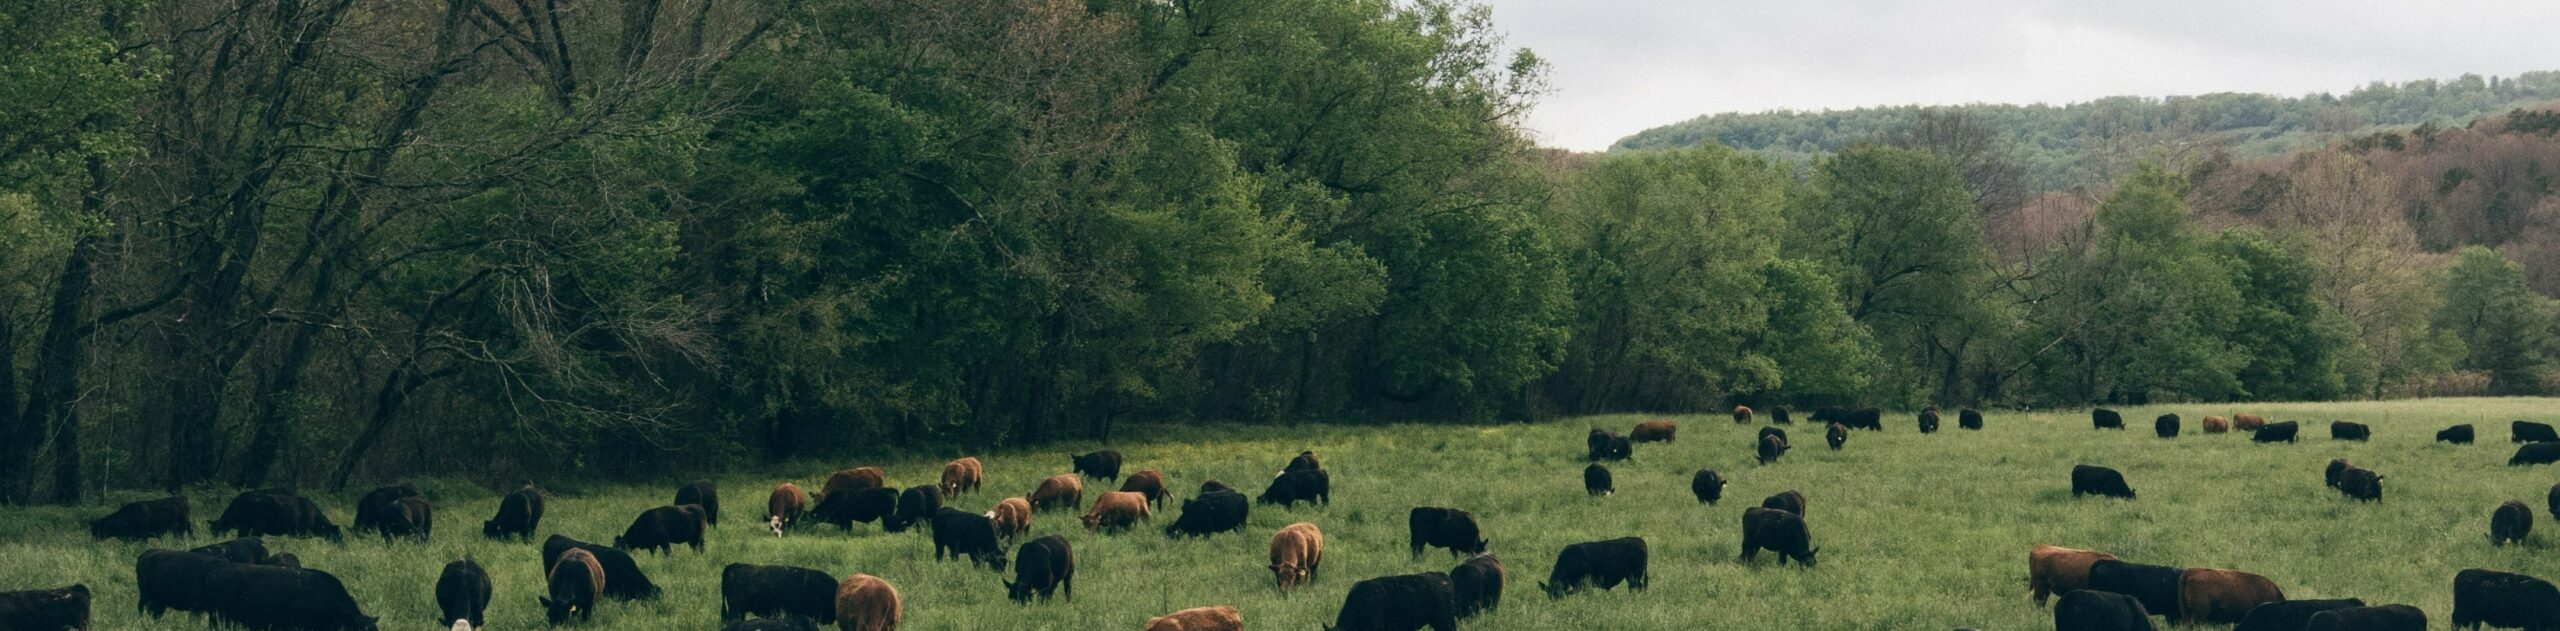 Landscape of black and brown cows grazing in a green field lined with green and brown trees.